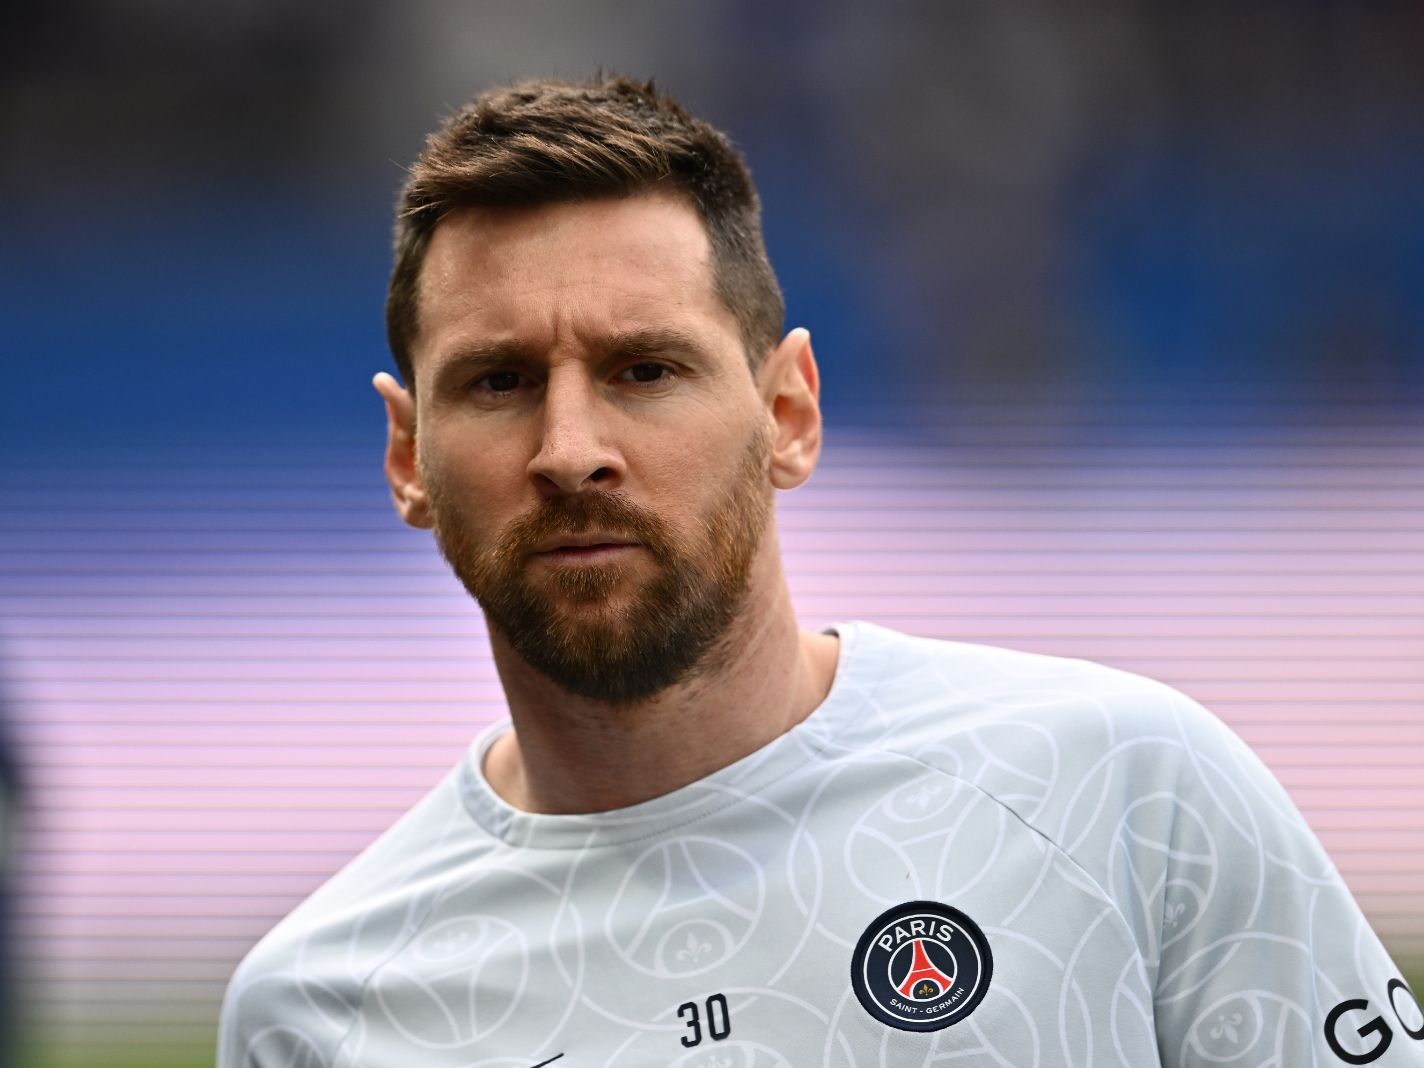 Is Lionel Messi Finally Leaving PSG? — Here’s a Breakdown of the Messy